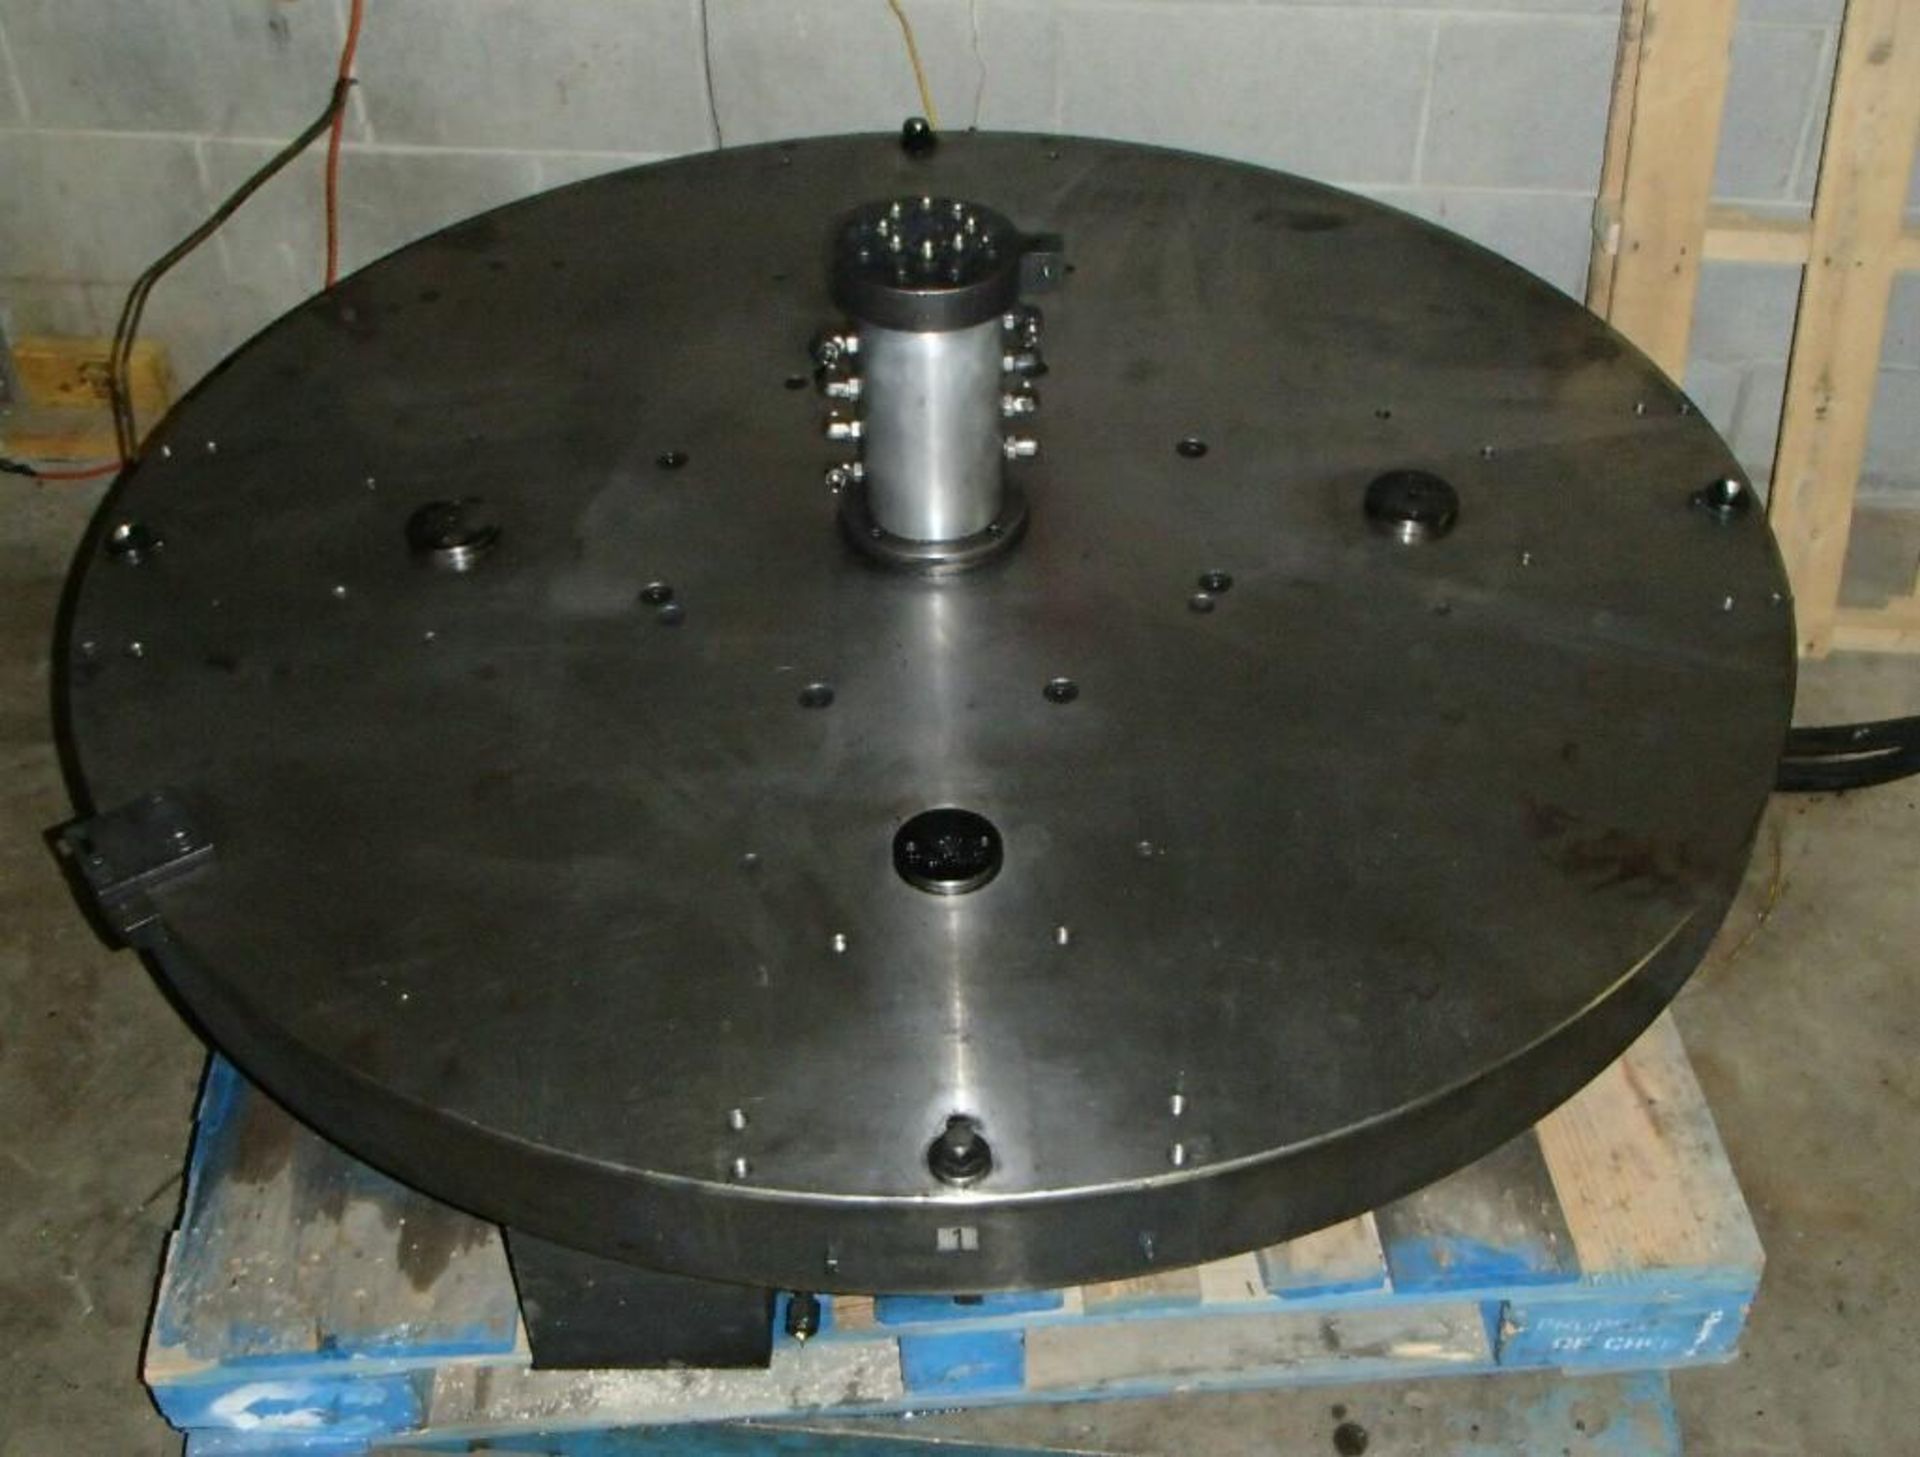 55" Fibrotakt Rotary Dial Type Indexing Table - Image 4 of 7